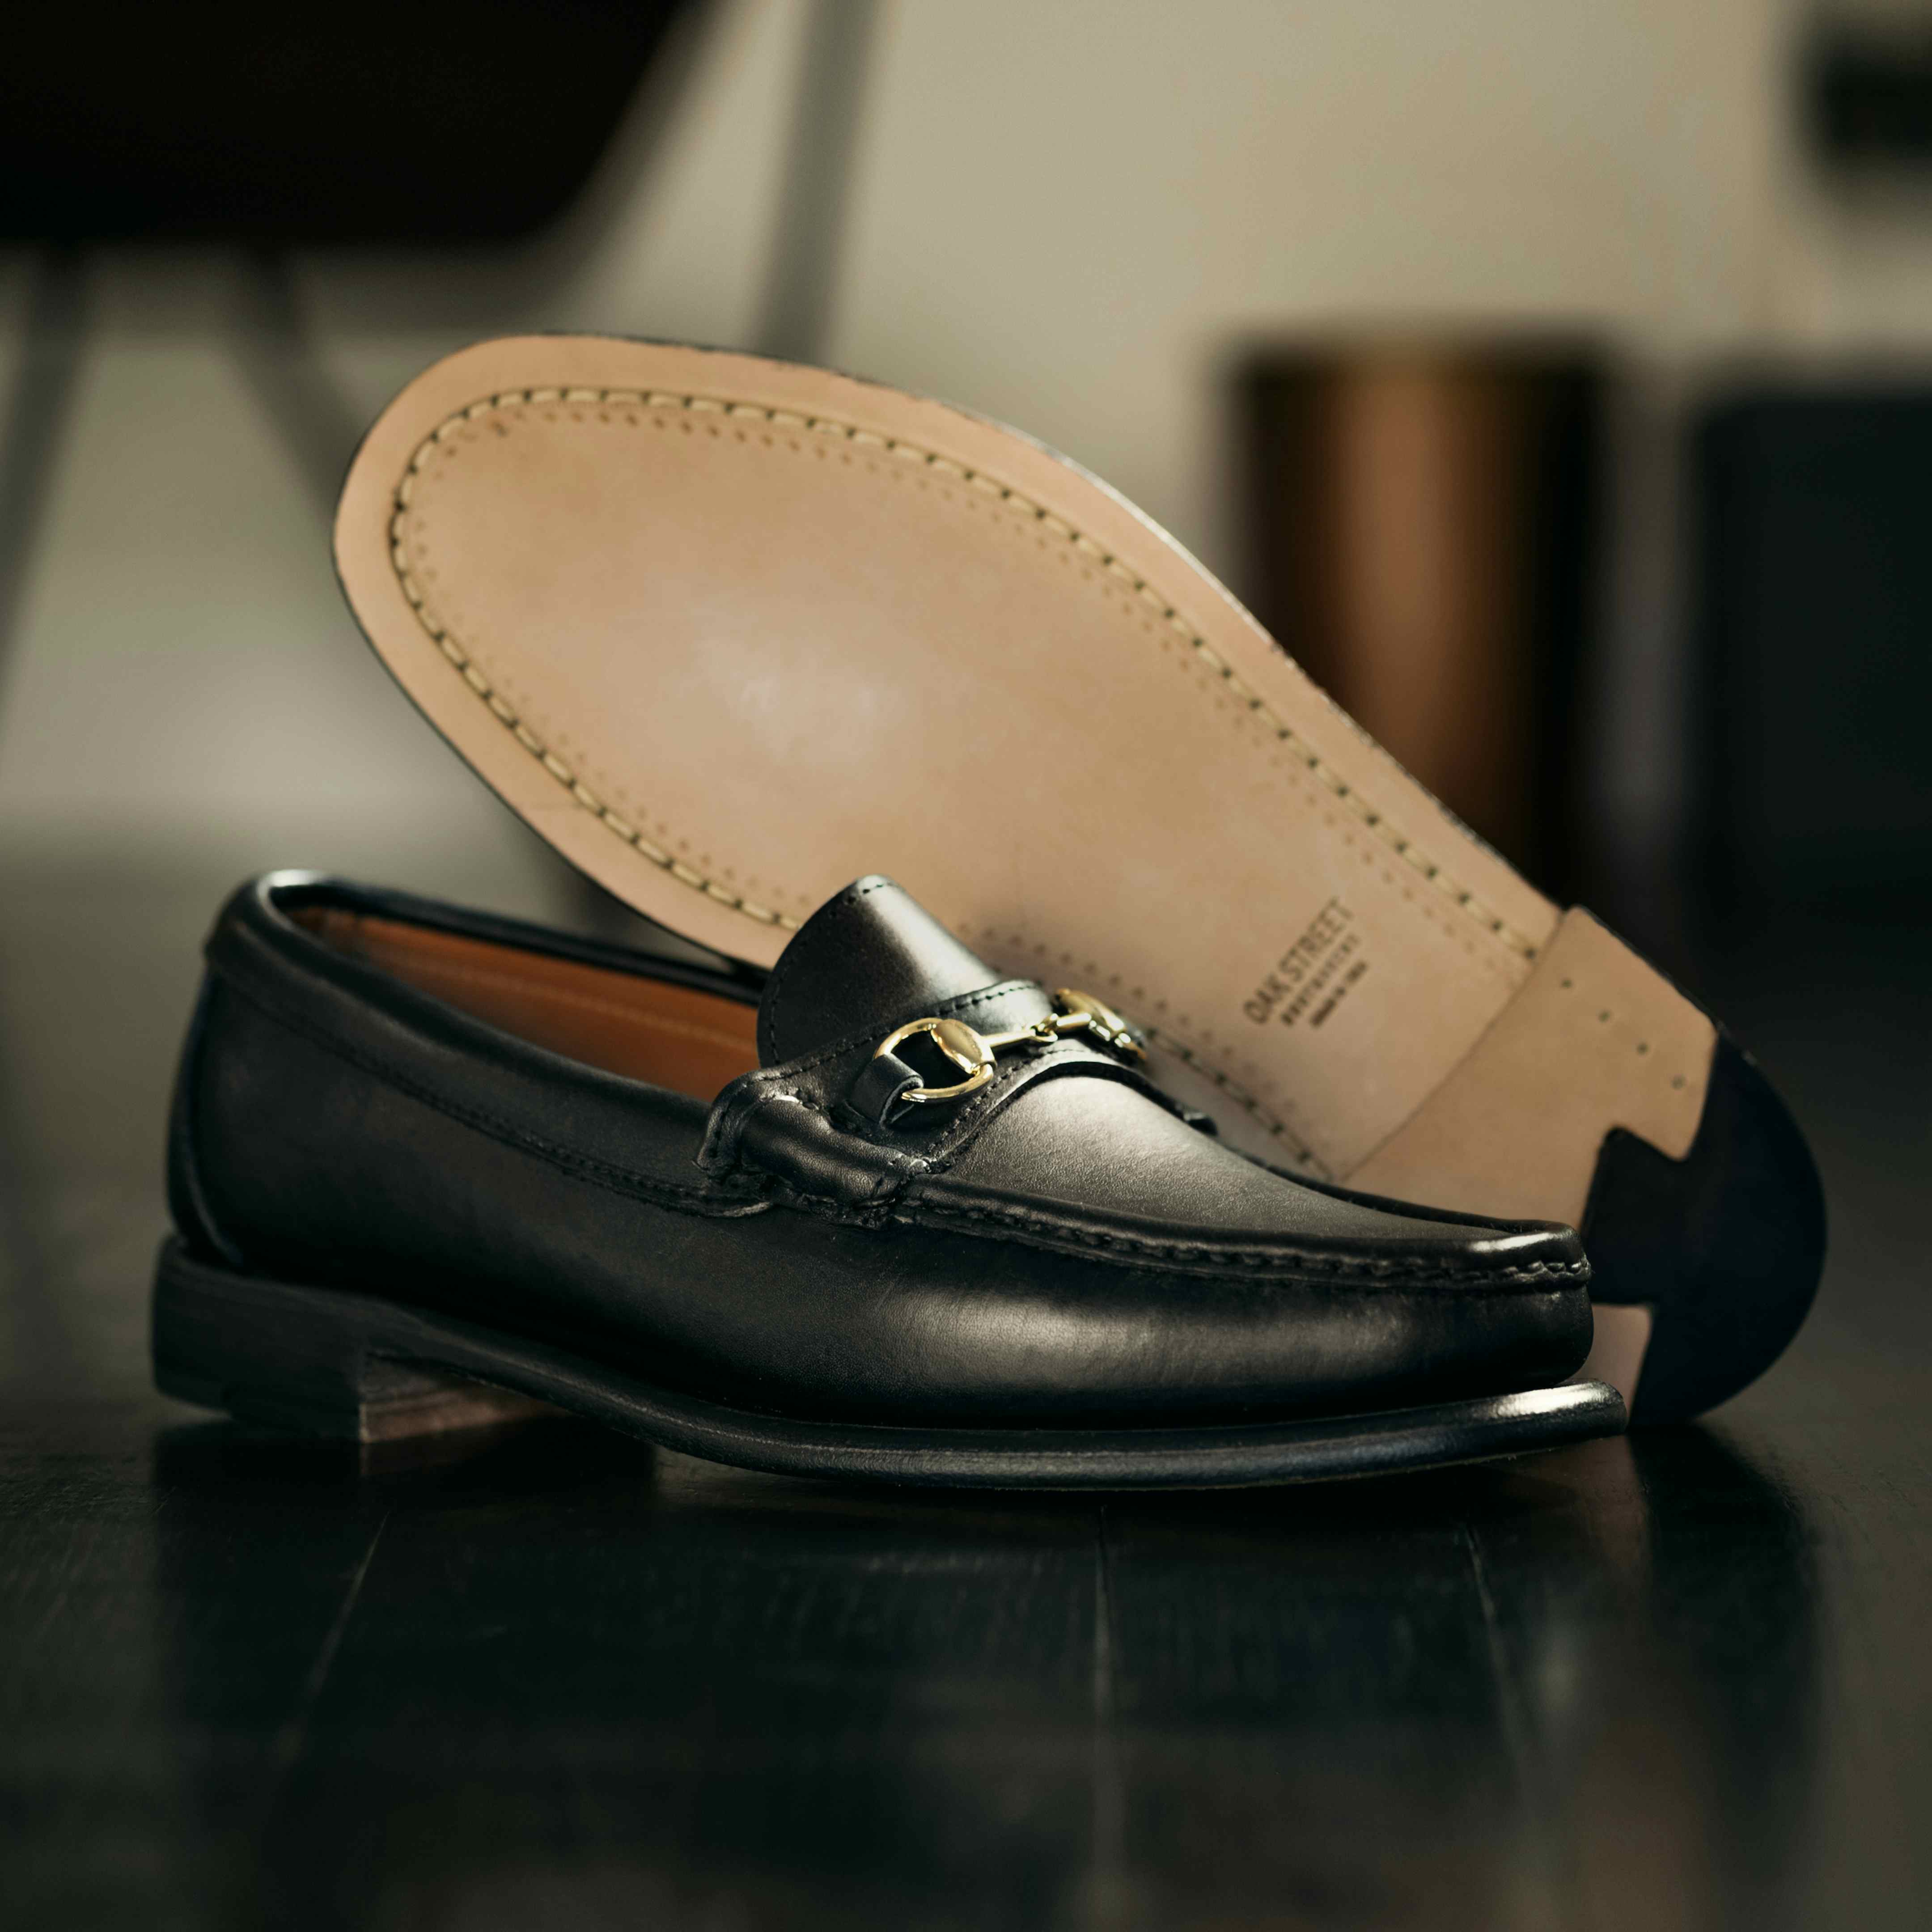 Bit Loafer - Black Latigo, Leather Sole with Dovetail Toplift - Made in ...